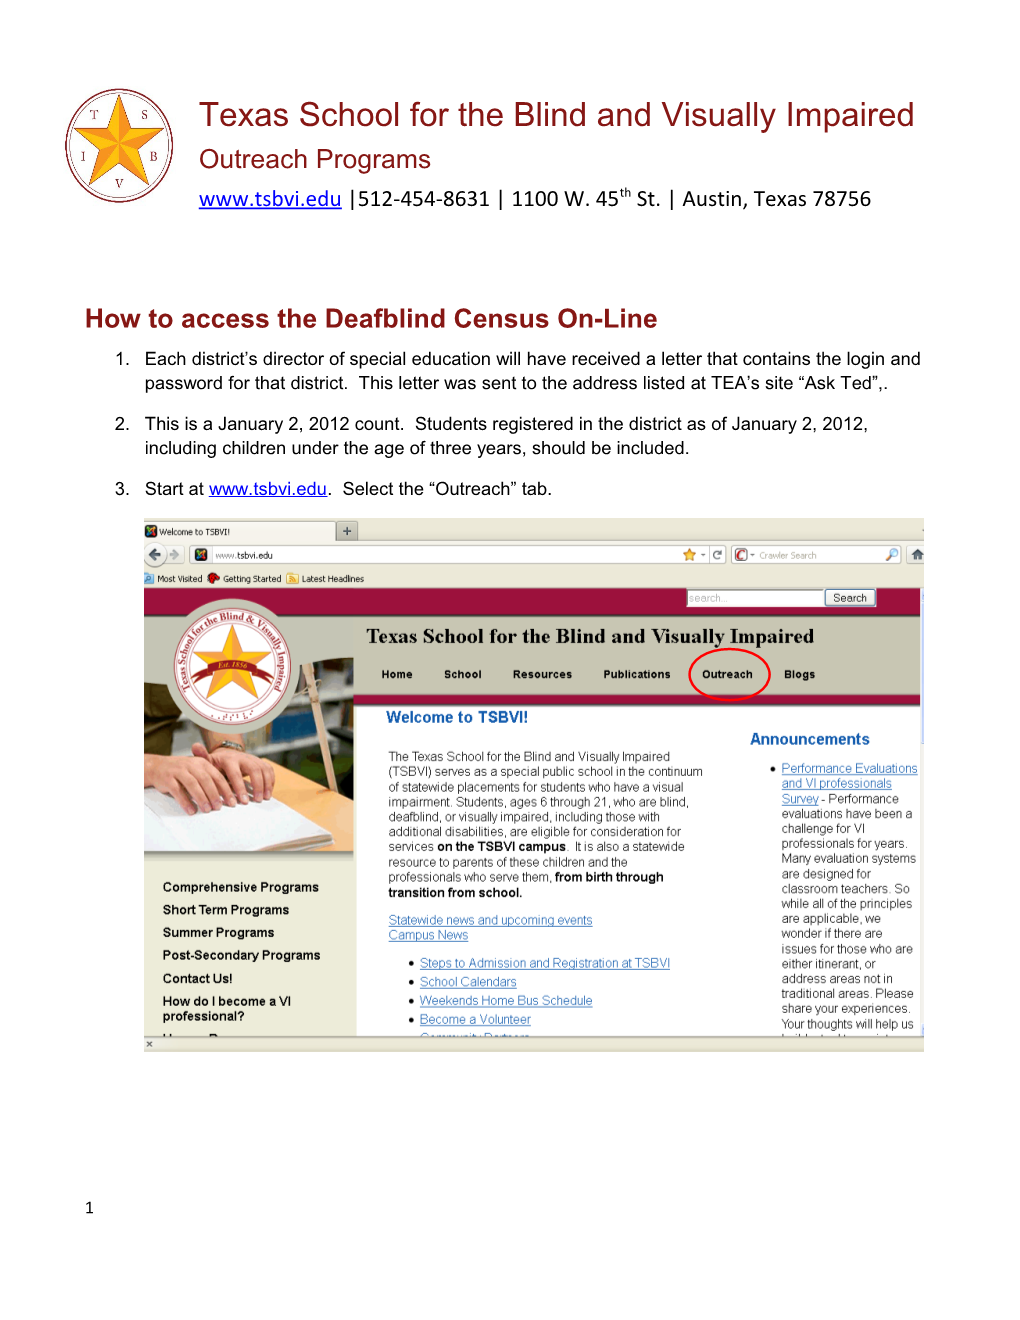 How to Access the Deafblind Census On-Line